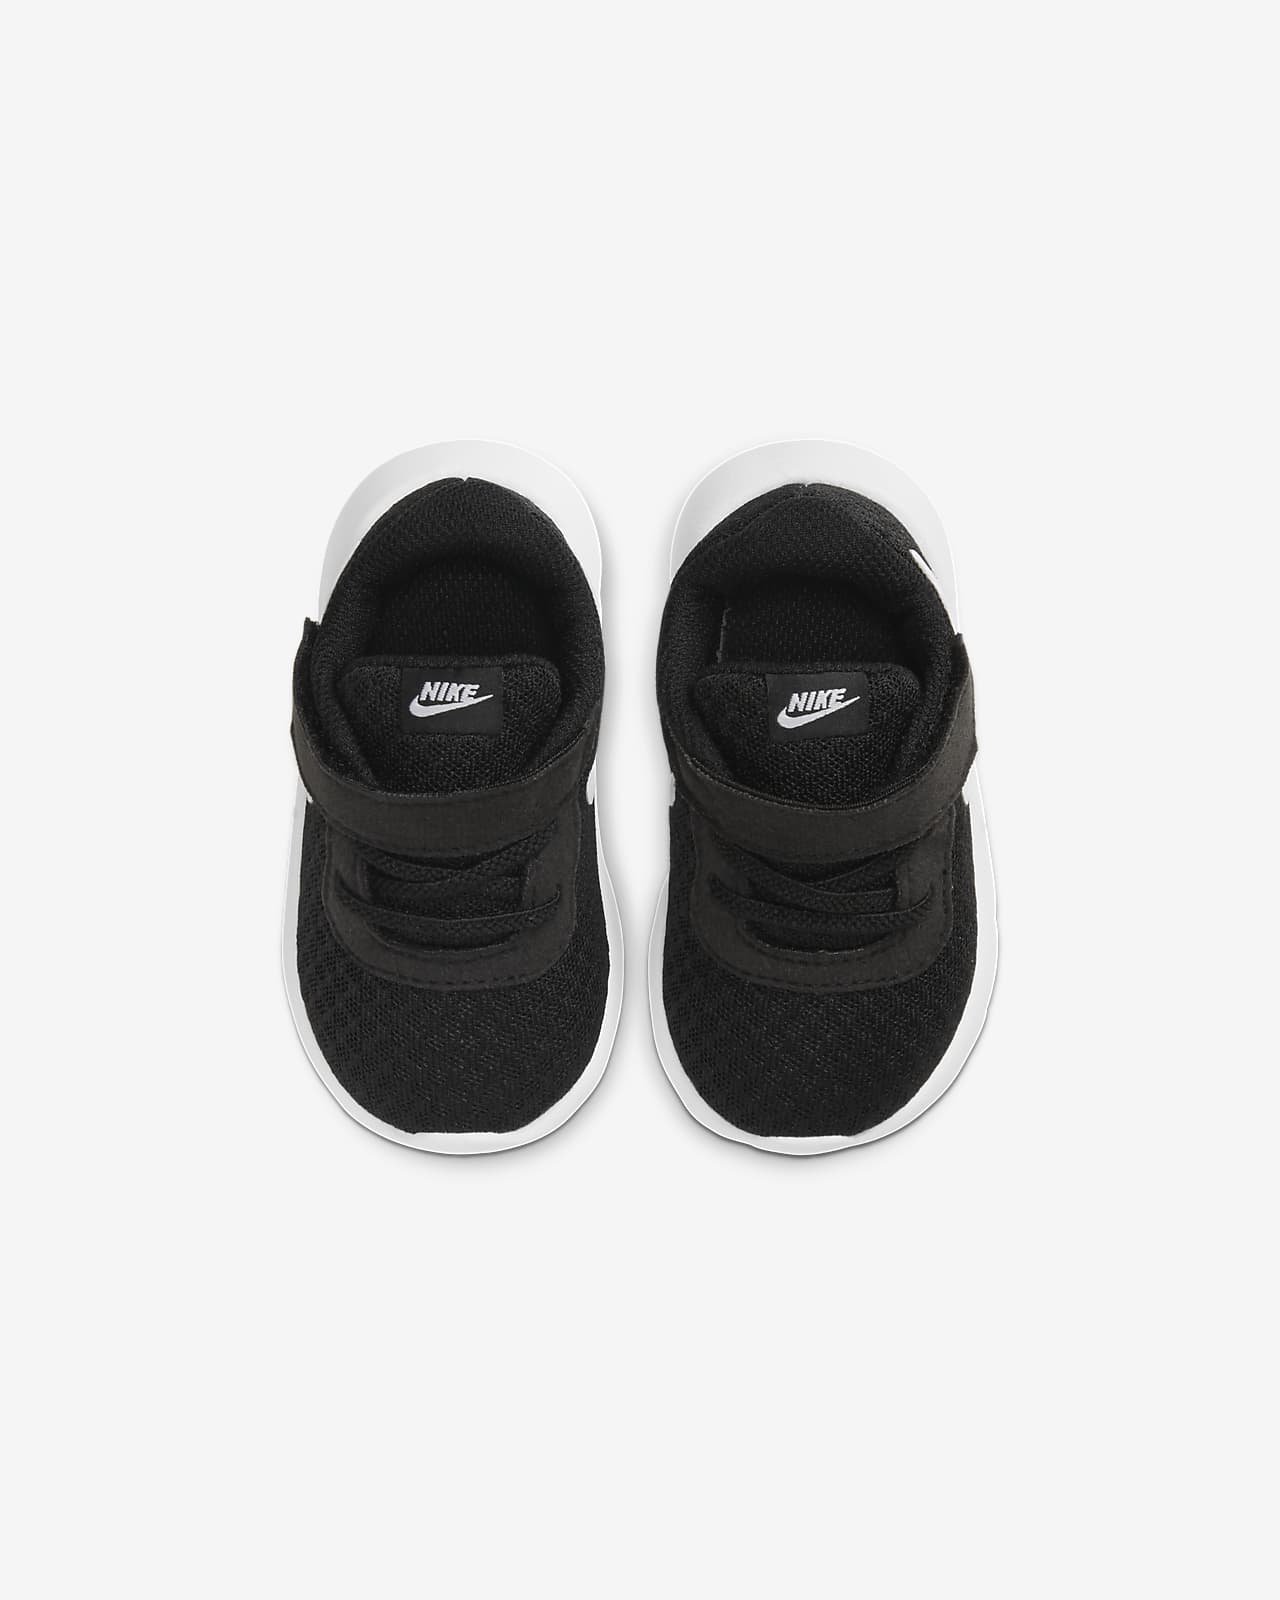 nike velcro baby shoes